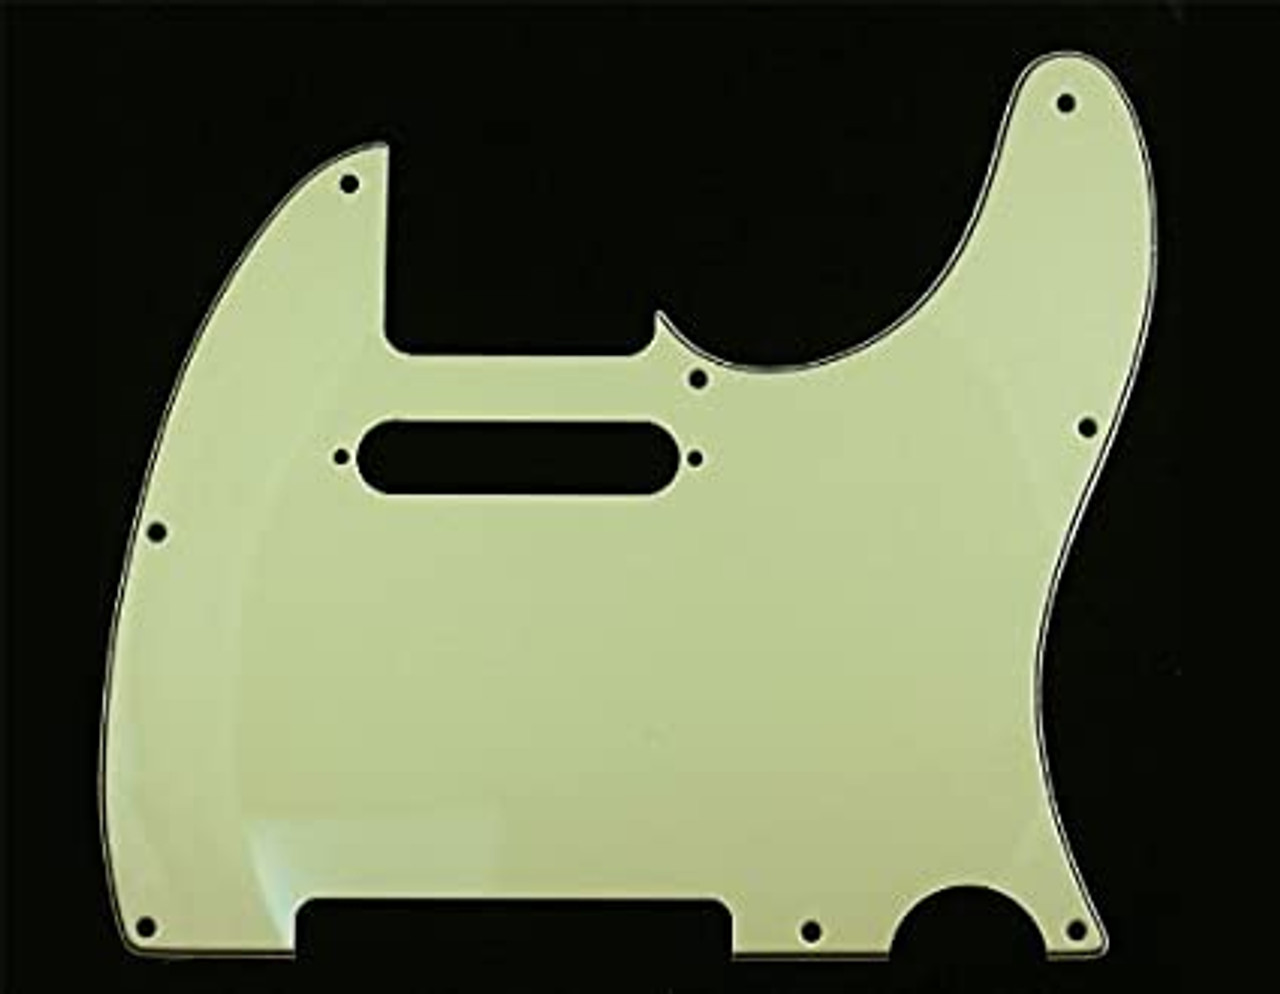 Mint Green 3-Ply Pickguard for Telecaster 8-Hole